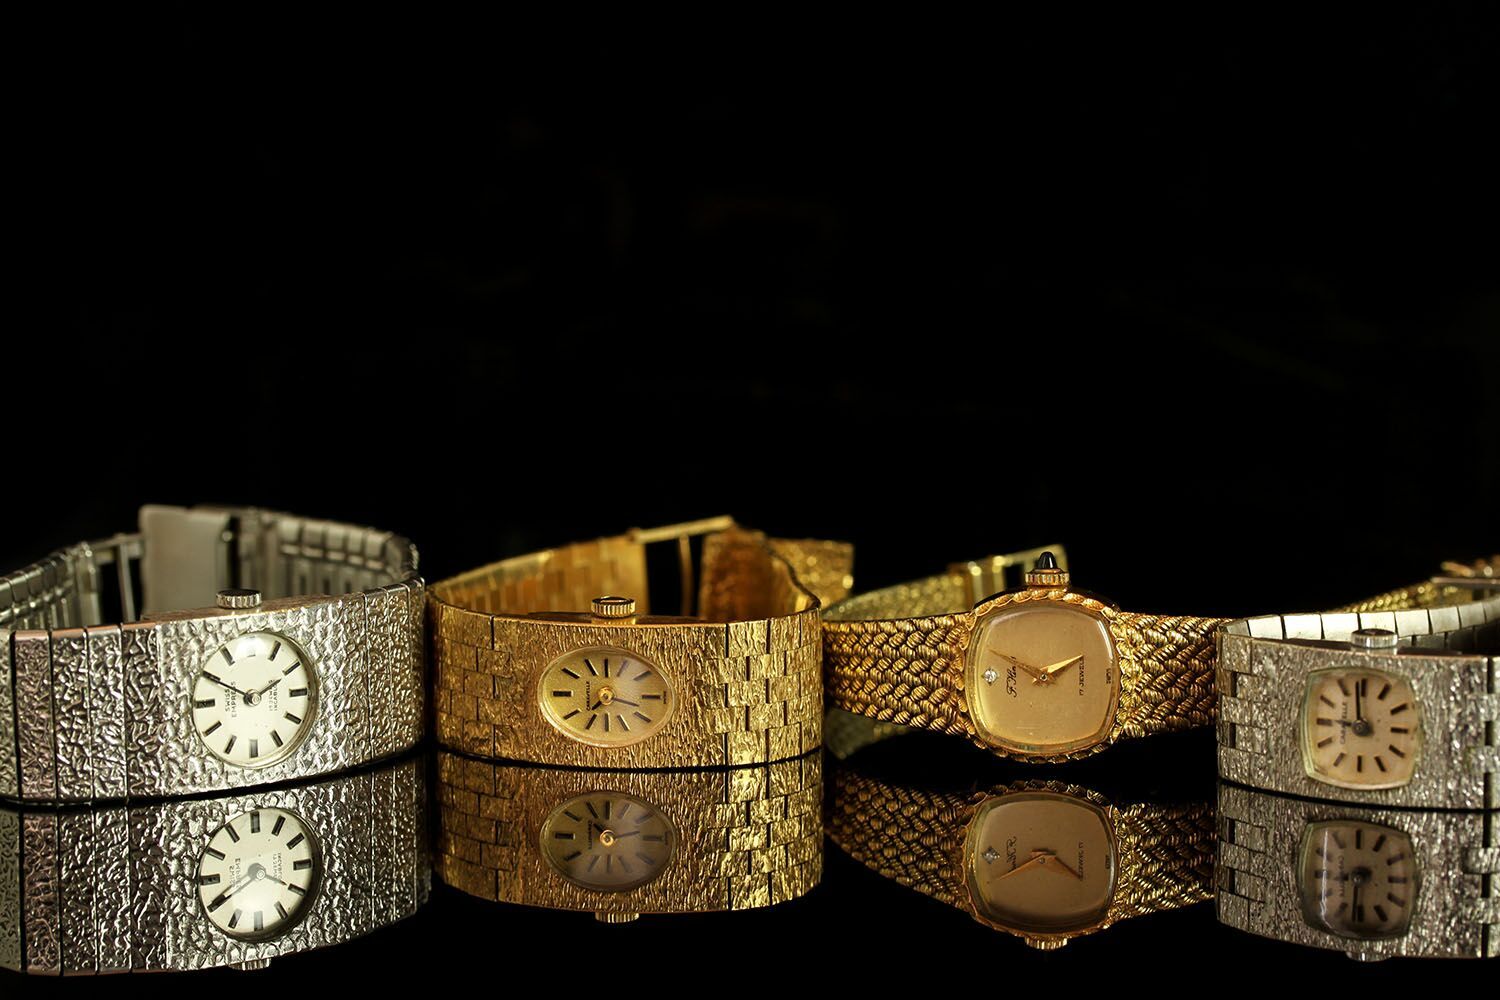 GROUP OF FOUR LADIES WATCHES INCLUDING A CARAVELLE,SWISS EMPRESS, F.HINDS AND WHITE METAL SWISS